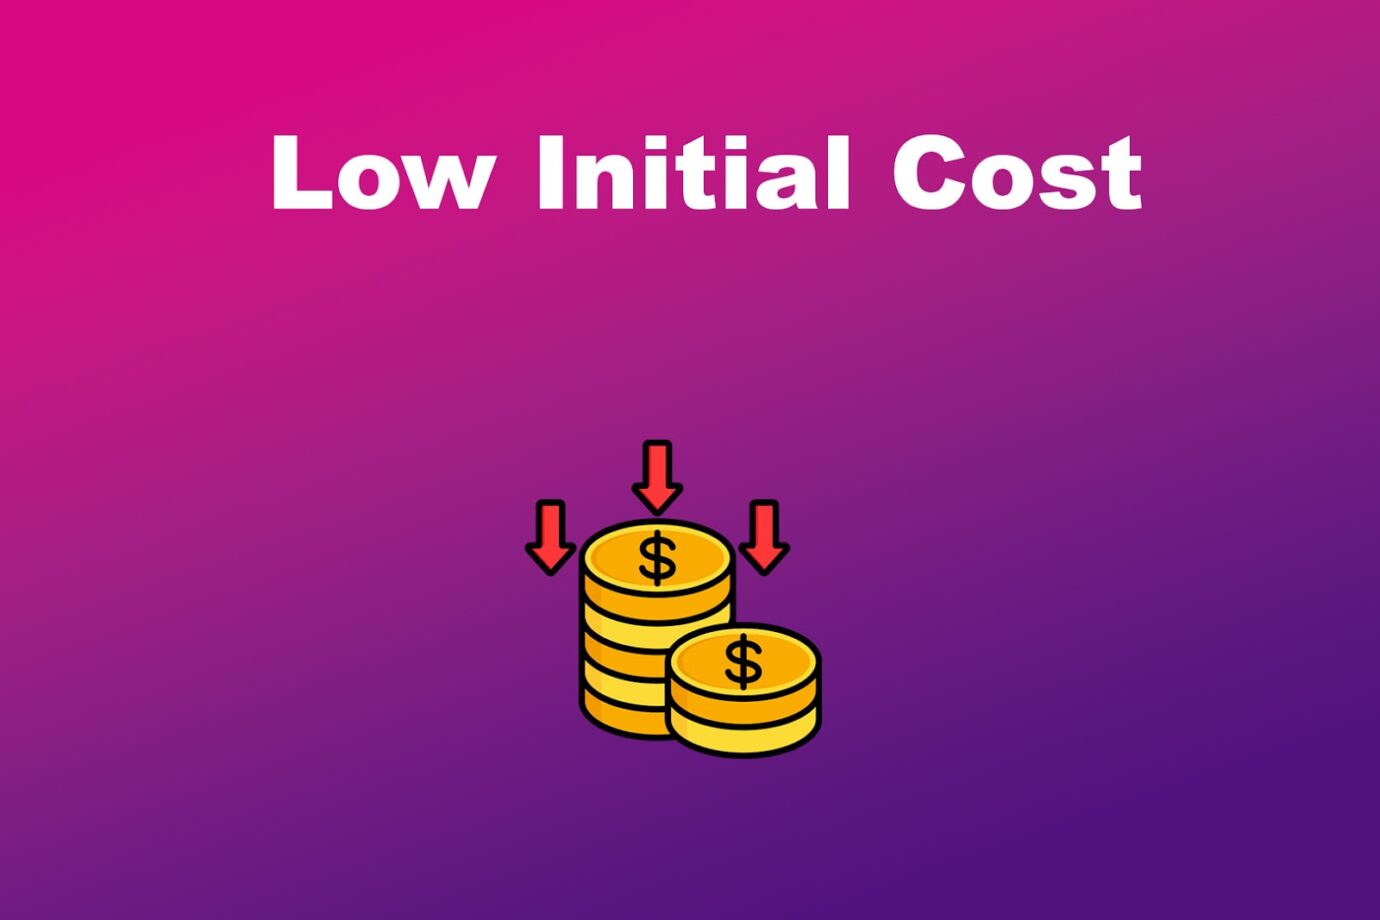 Advantage of Manual Data Entry - Low Initial Cost